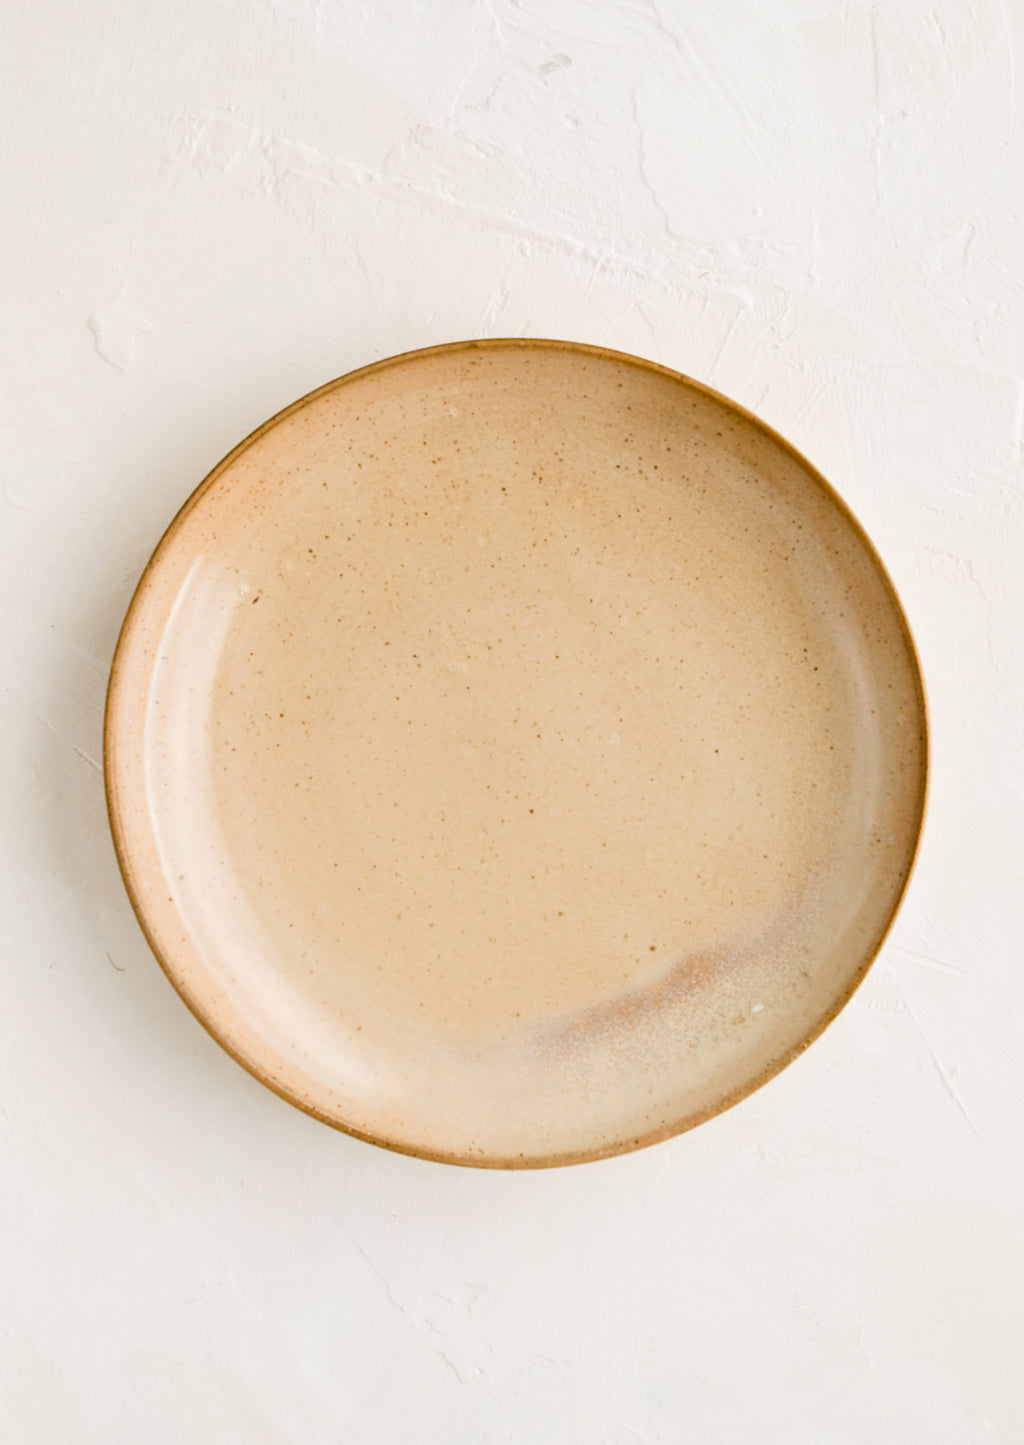 3: A round side plate in a speckled tan glaze.